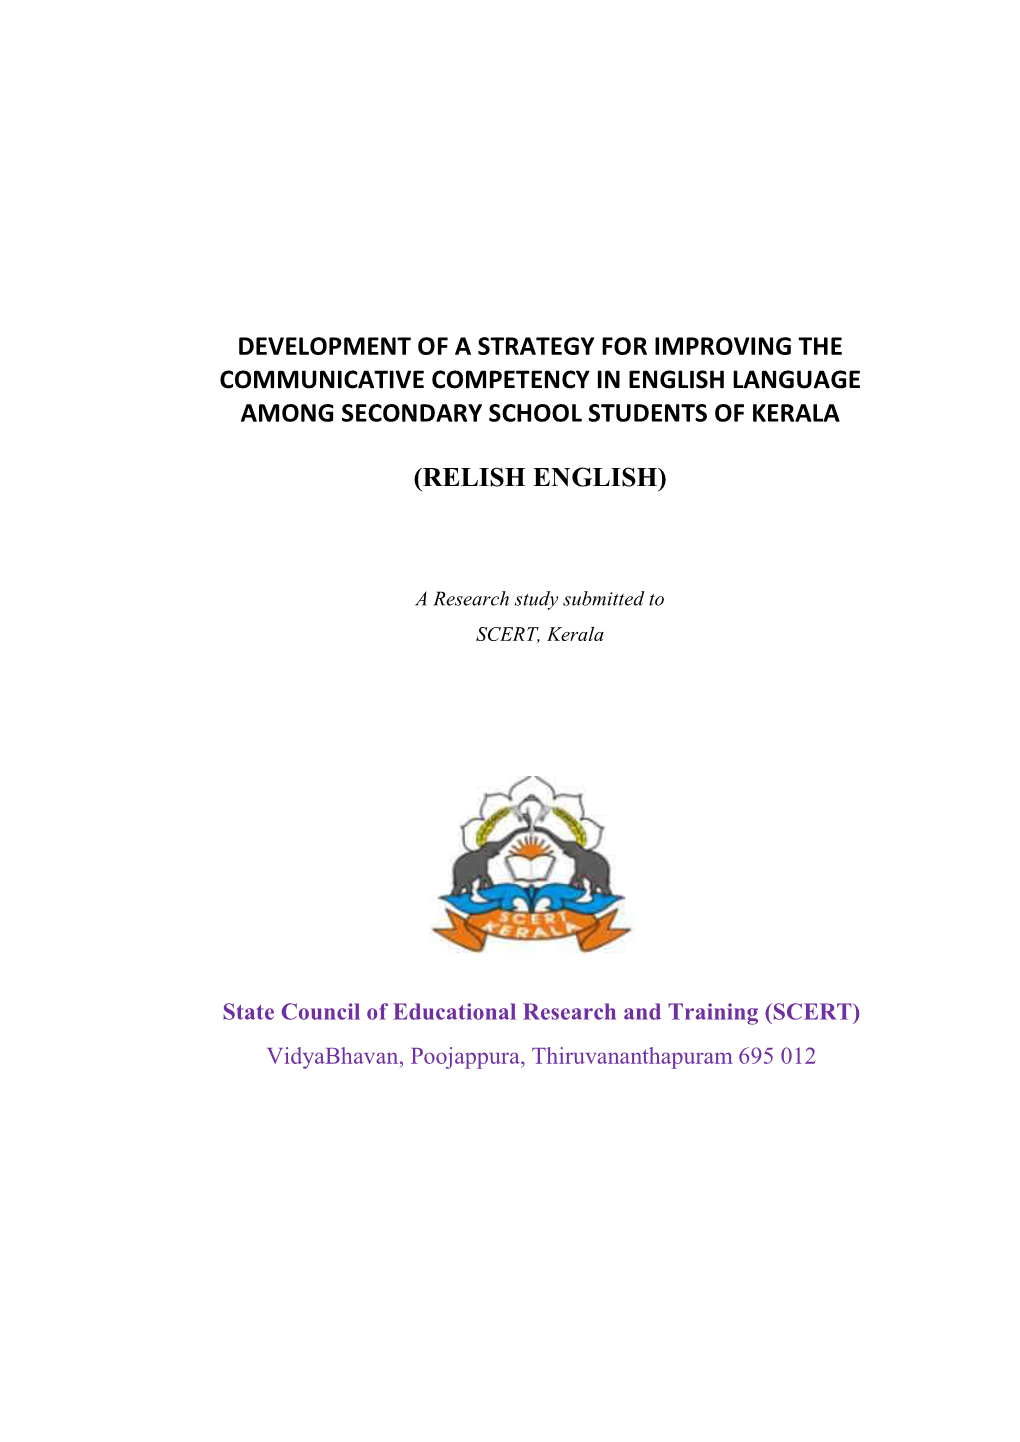 Development of a Strategy for Improving the Communicative Competency in English Language Among Secondary School Students of Kerala